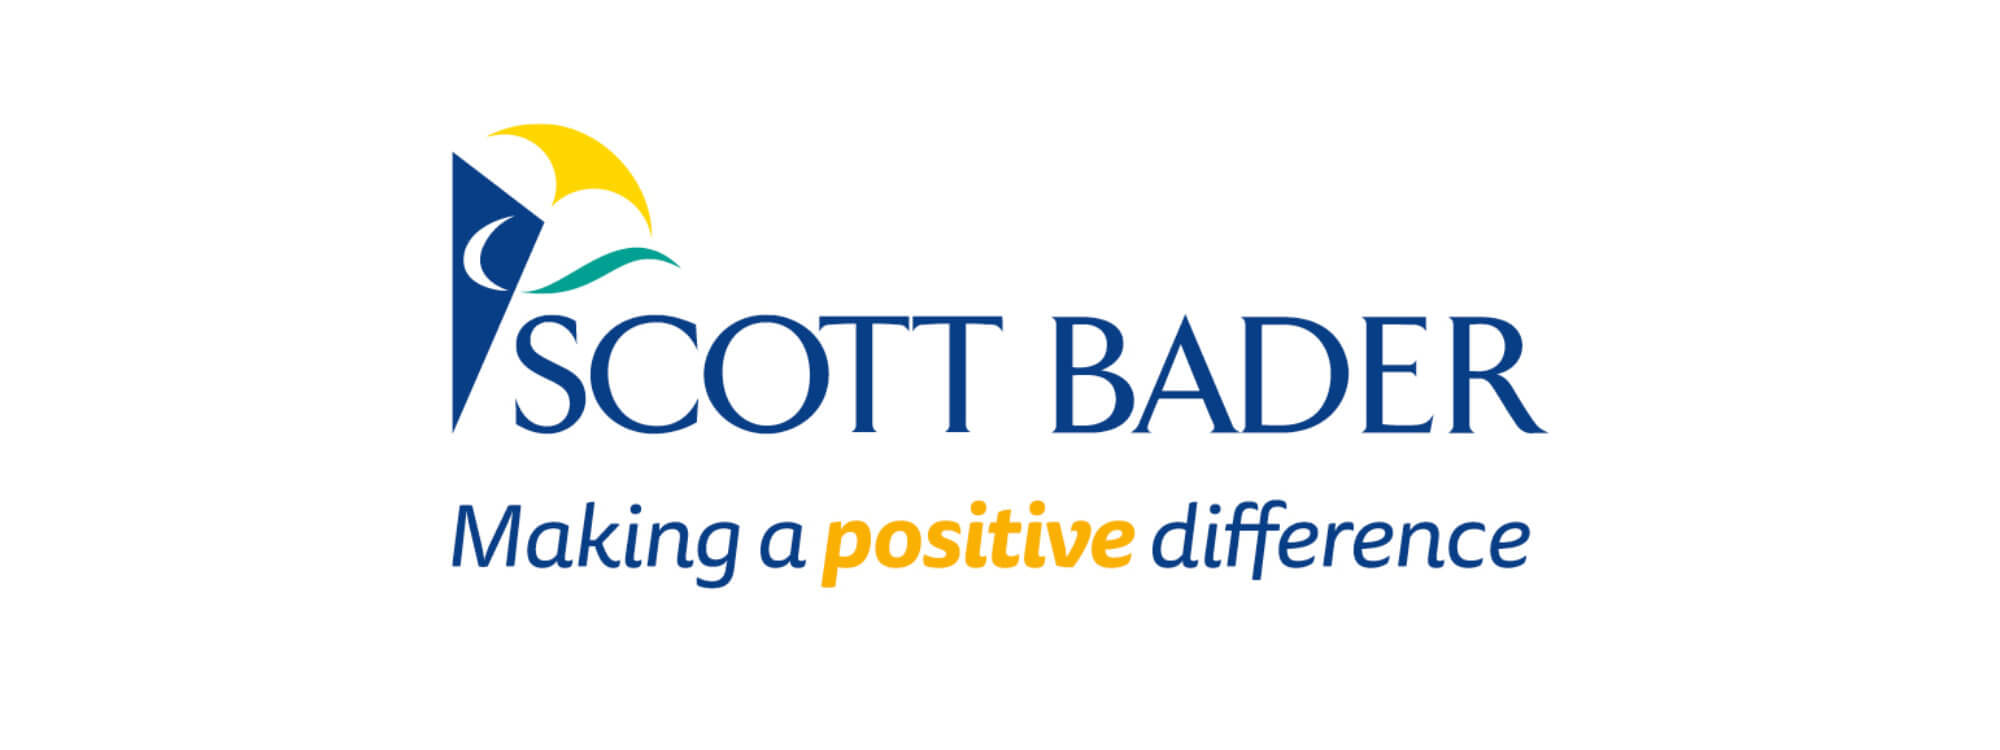 Scott Bader appointed sole distributor of United Initiators’ BAYCAT<sup>®</sup>